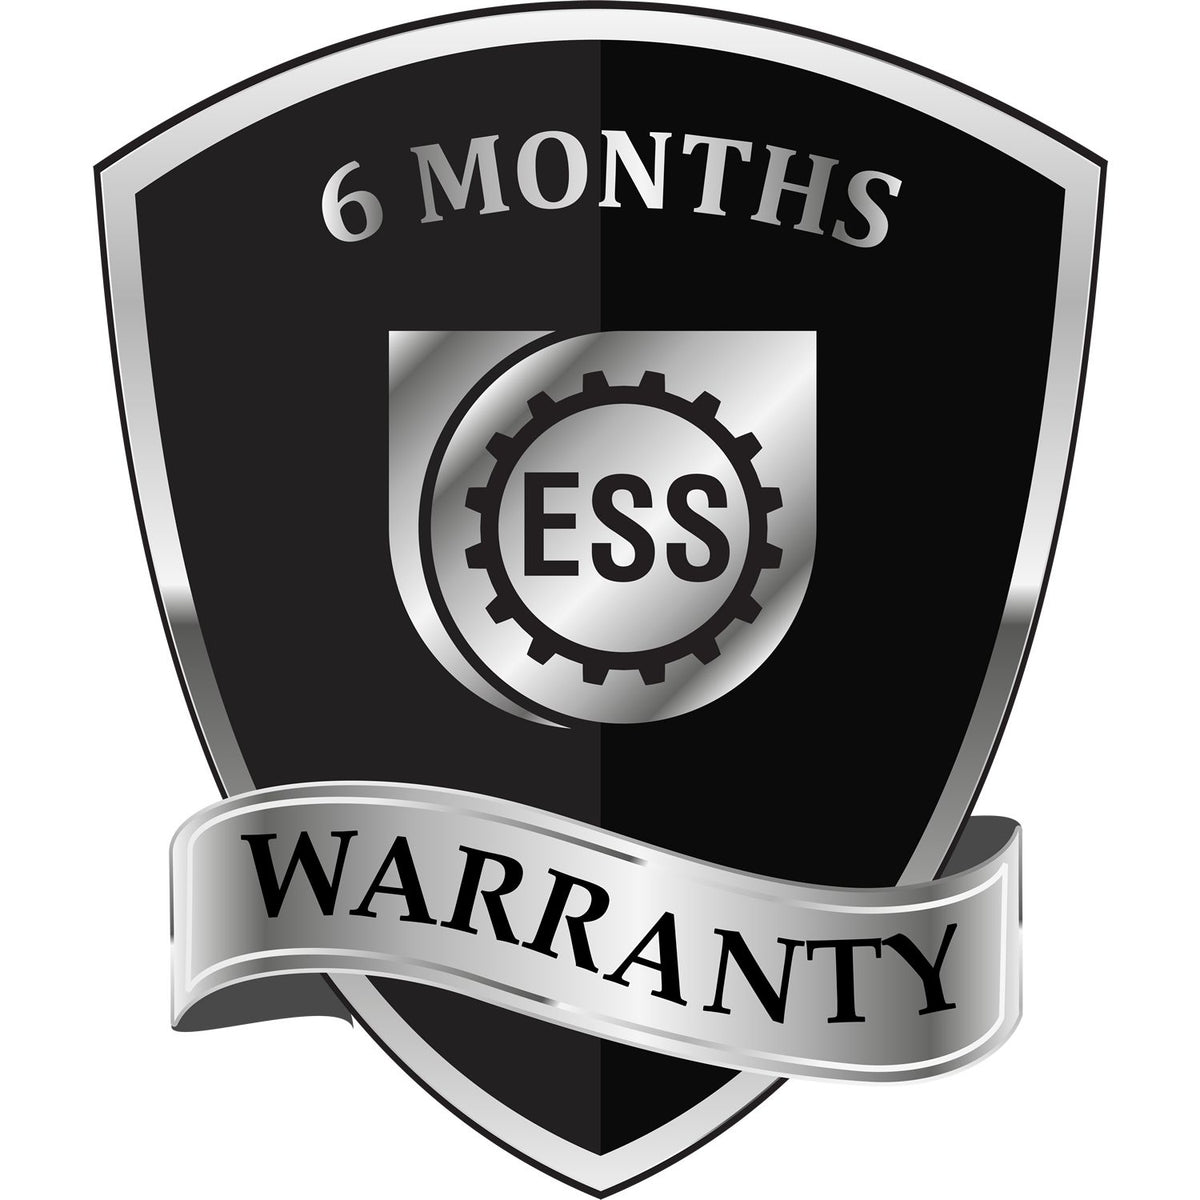 A badge or emblem showing a warranty icon for the District of Columbia Professional Engineer Seal Stamp